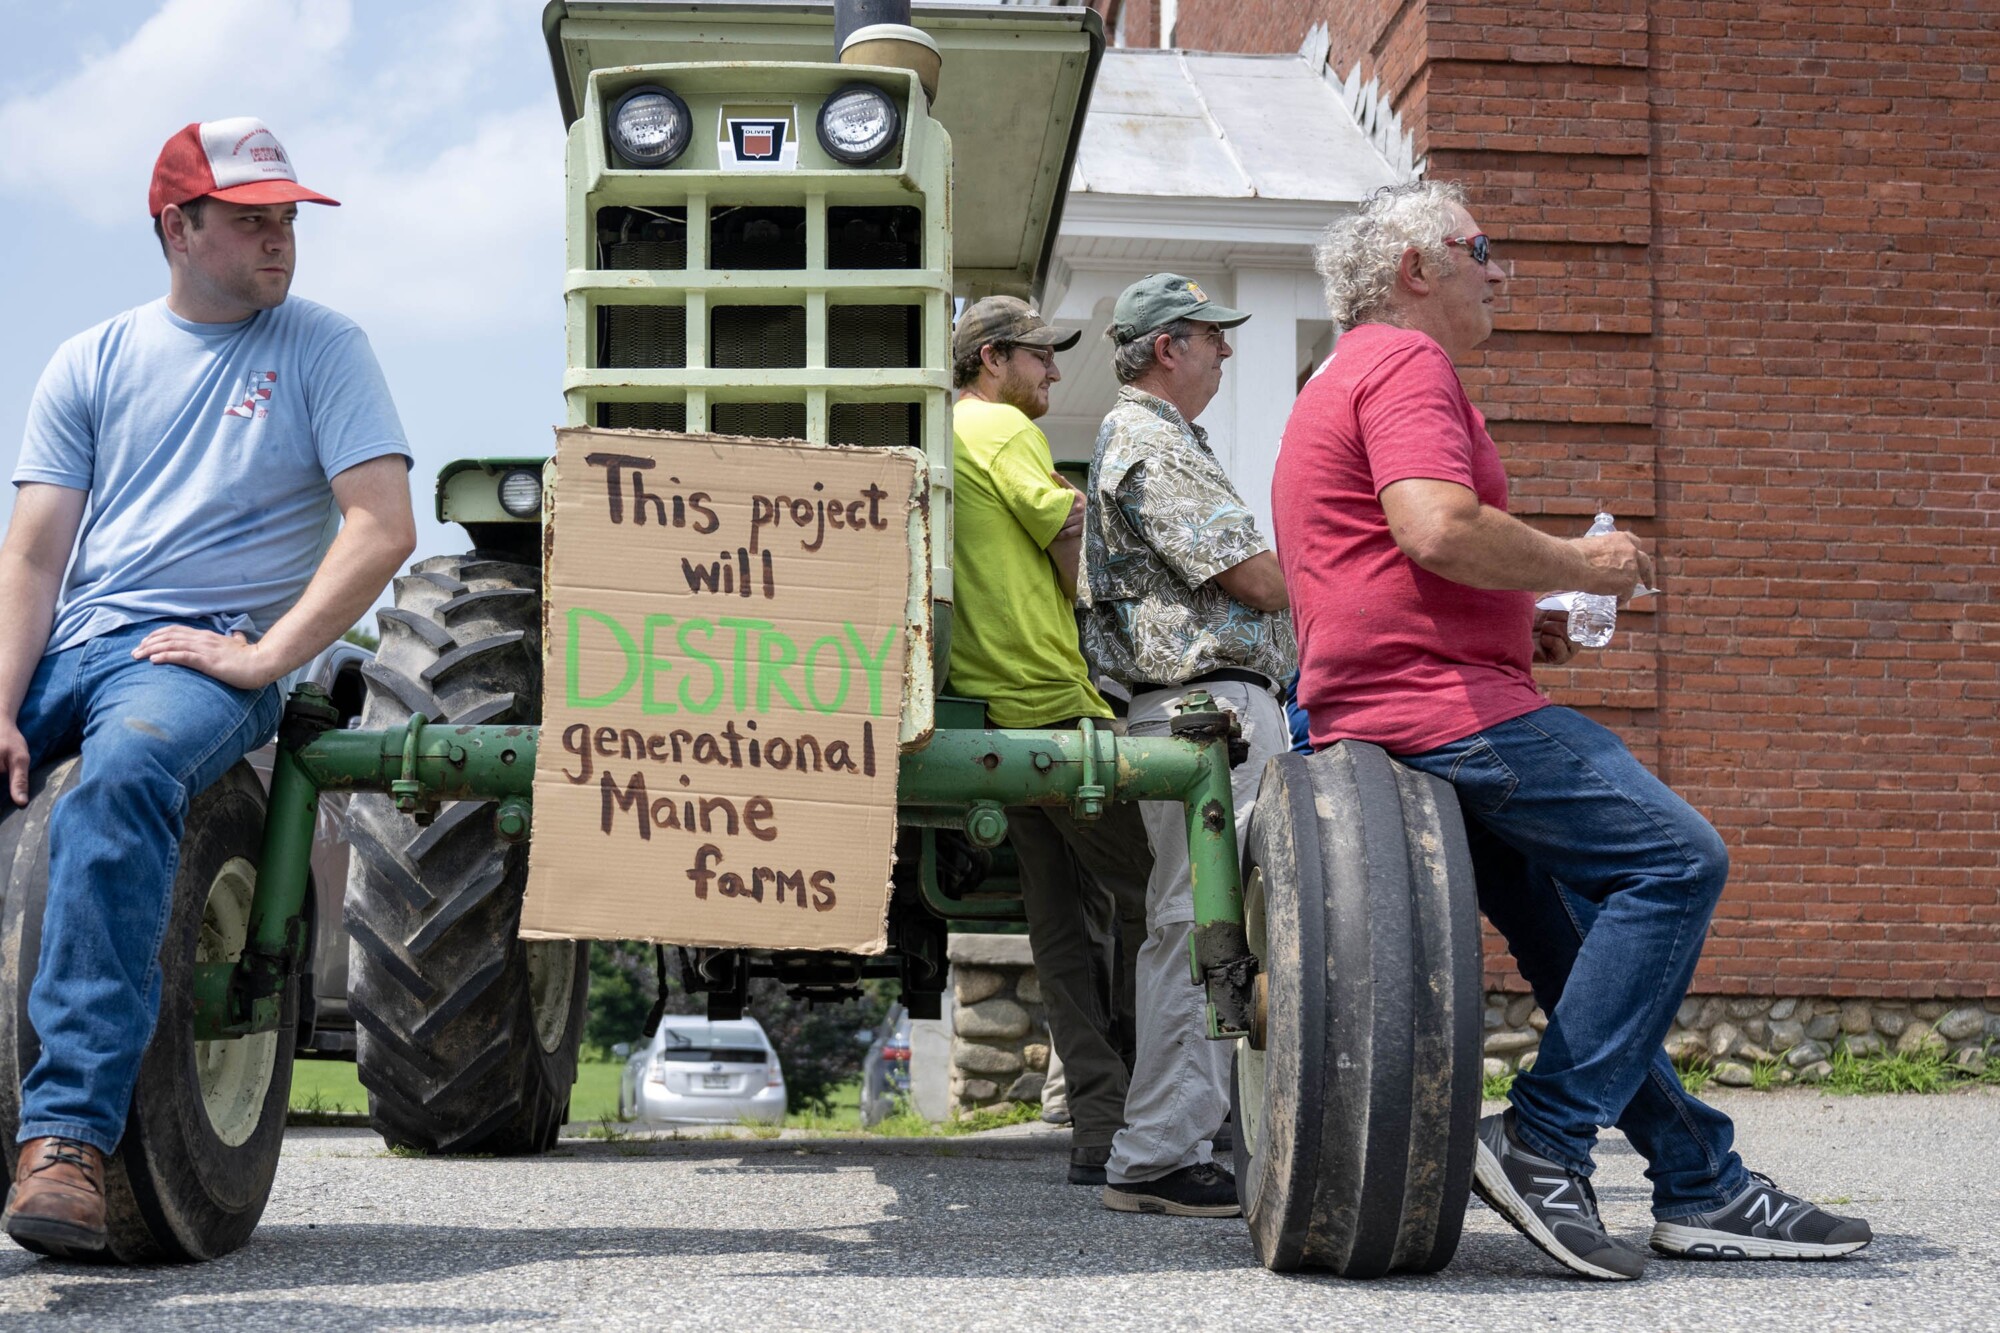 Farmers roll out tractors, trucks in Albion to protest proposed transmission corridor image pic